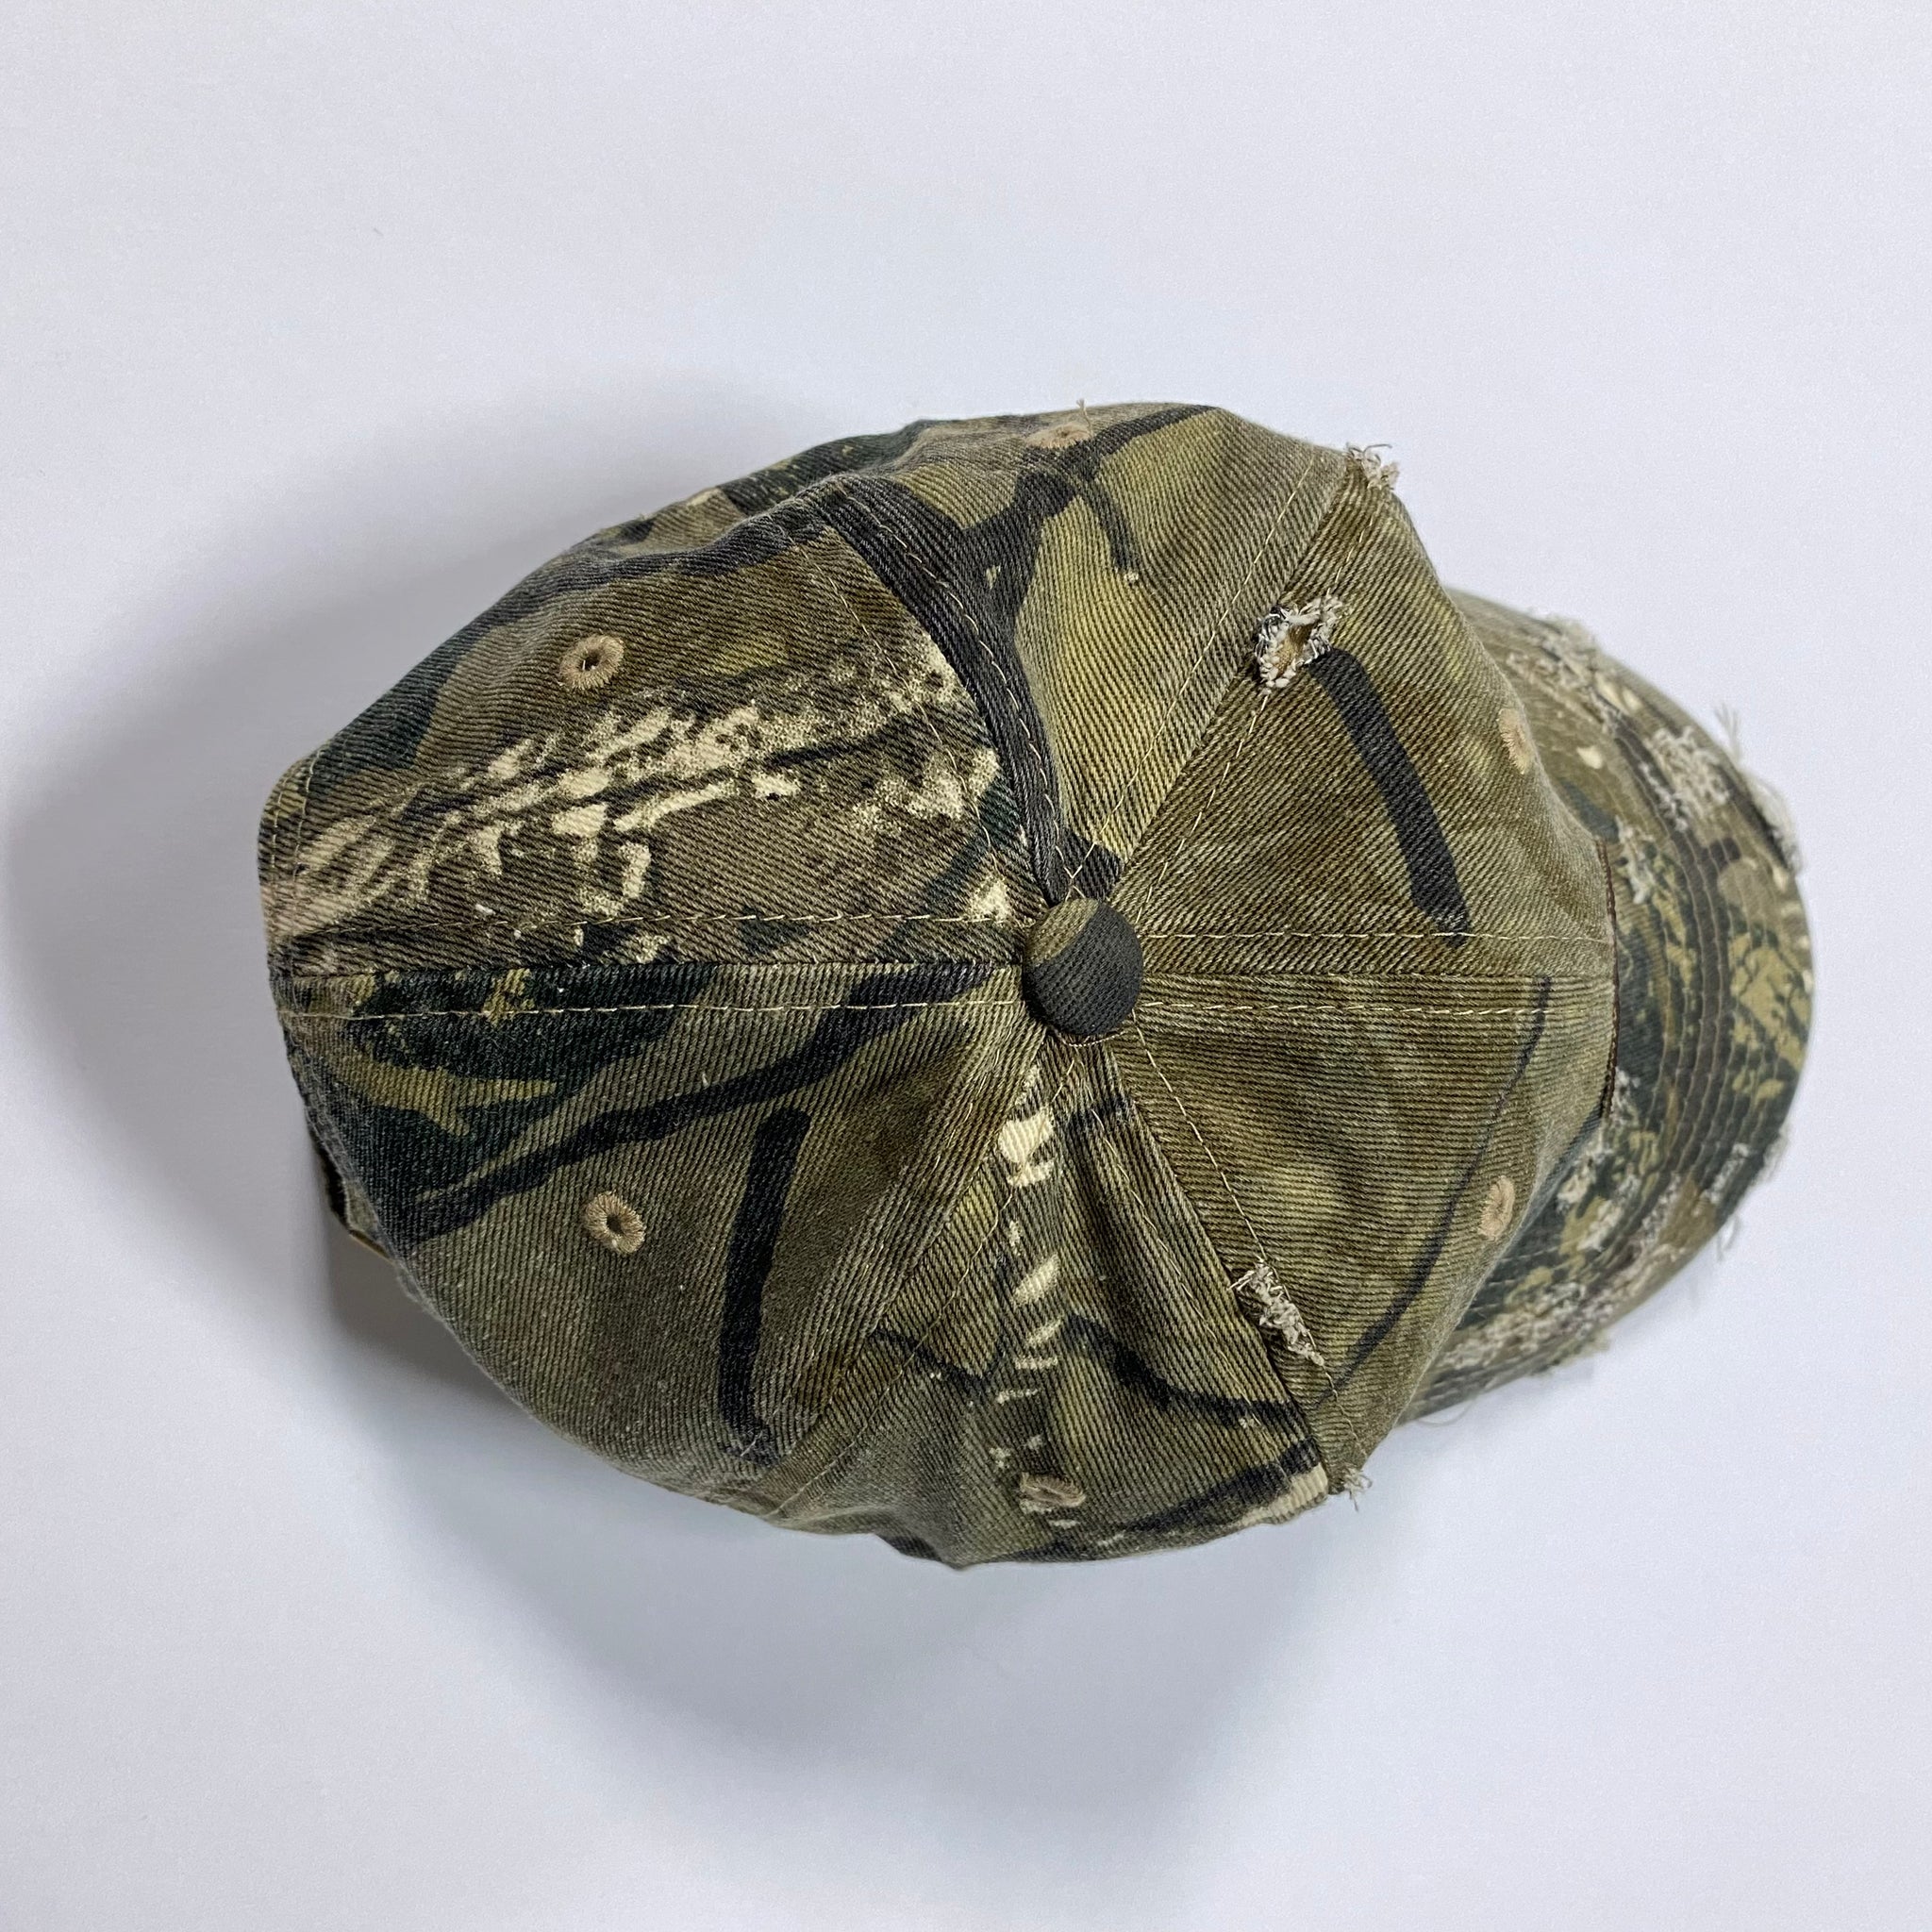 UPCYCLE LV DISTRESSED FOREST CAMO HAT